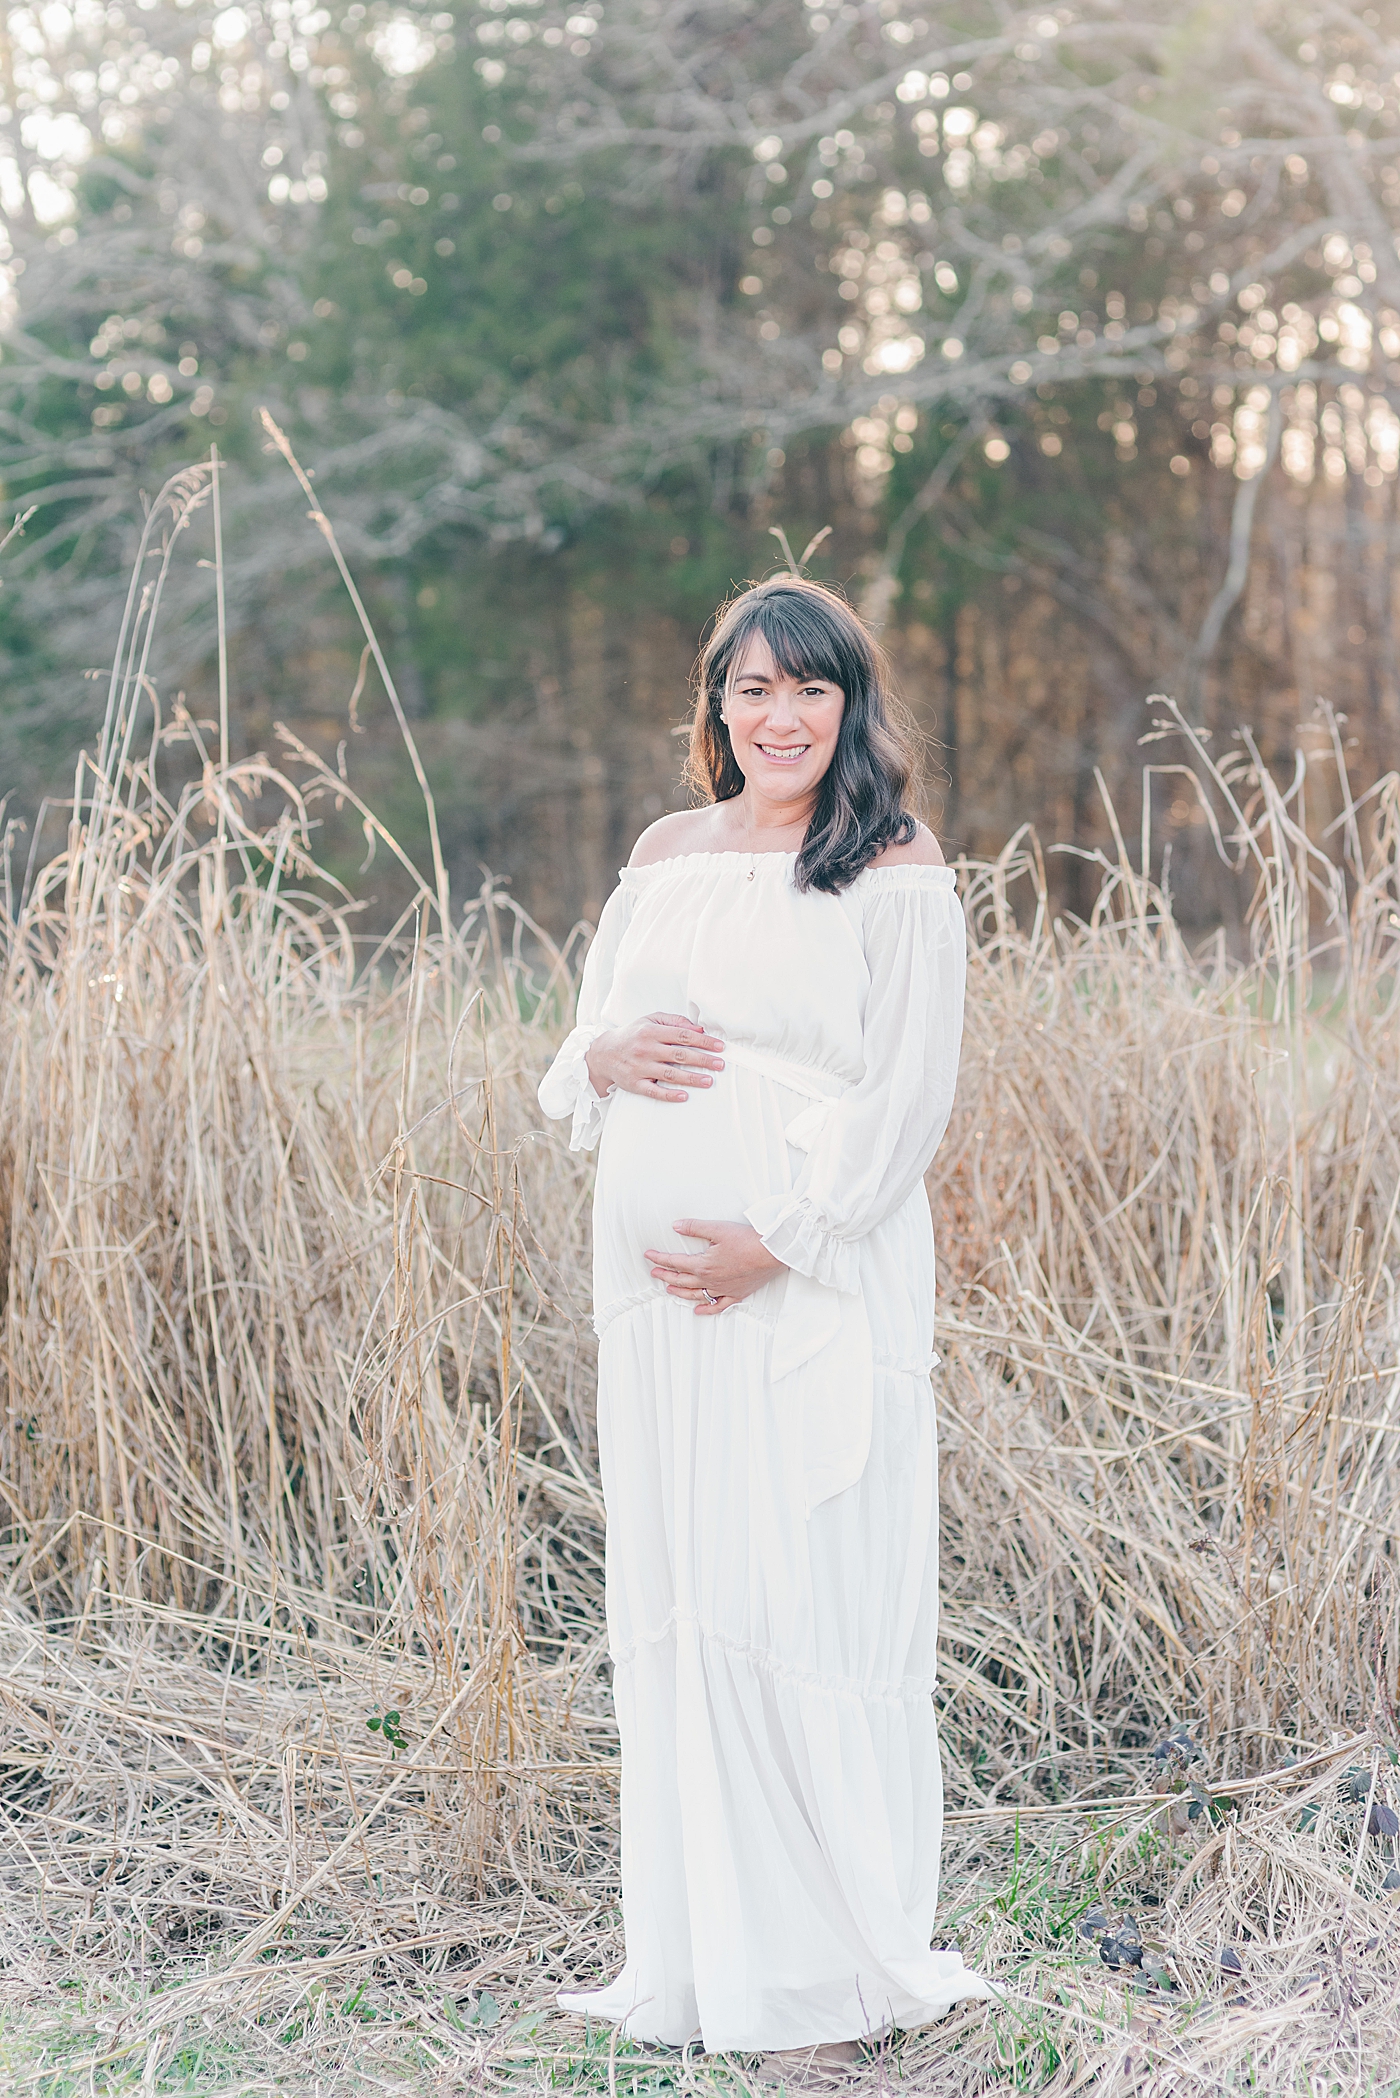 Smiling mom to be in a white dress | Photo by Anna Wisjo Photography